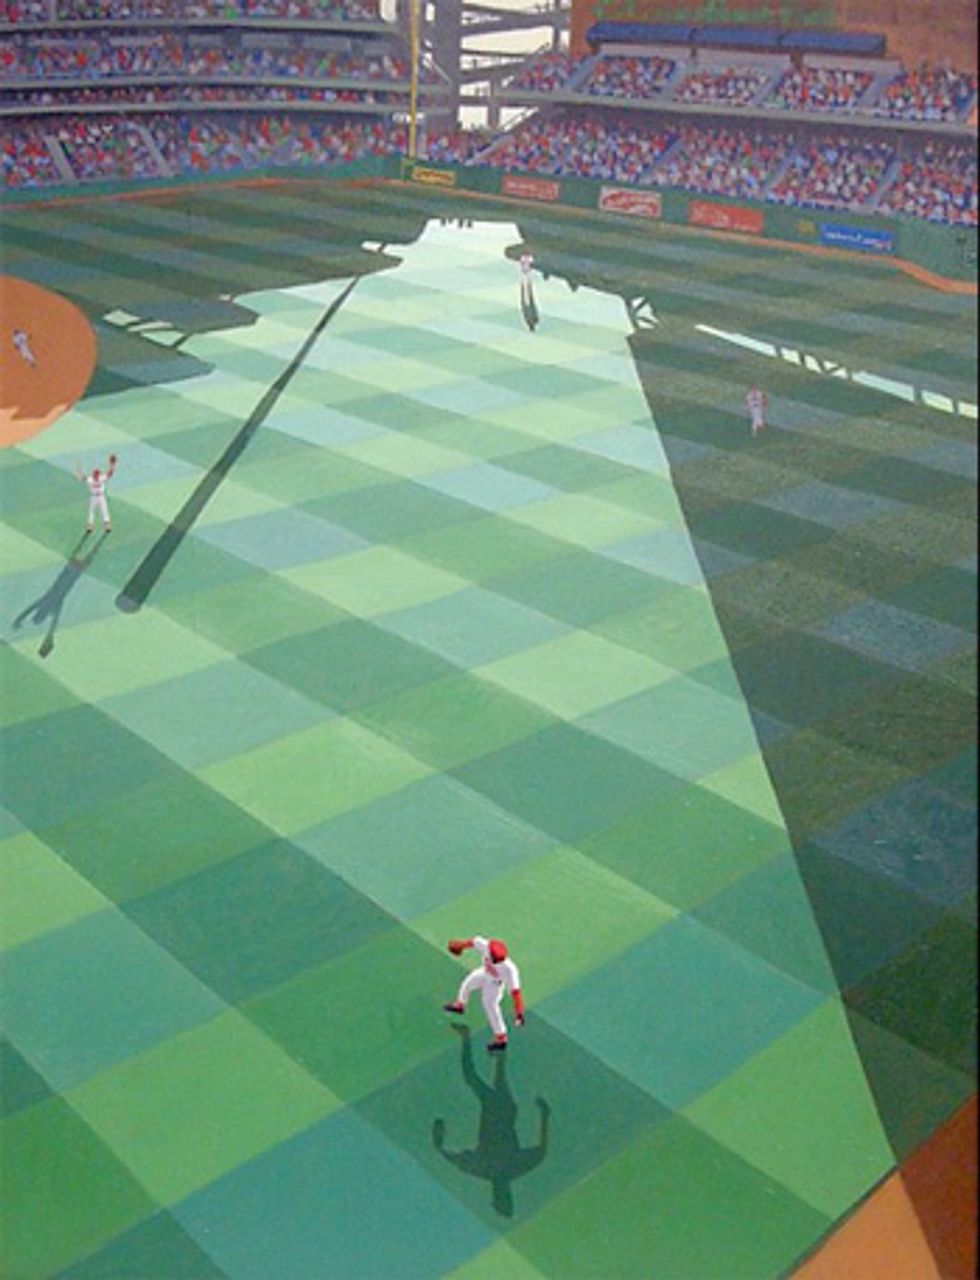 Baseball Transformed Into Art @ George Krevsky Gallery, Just In Time For Friday's Home Game